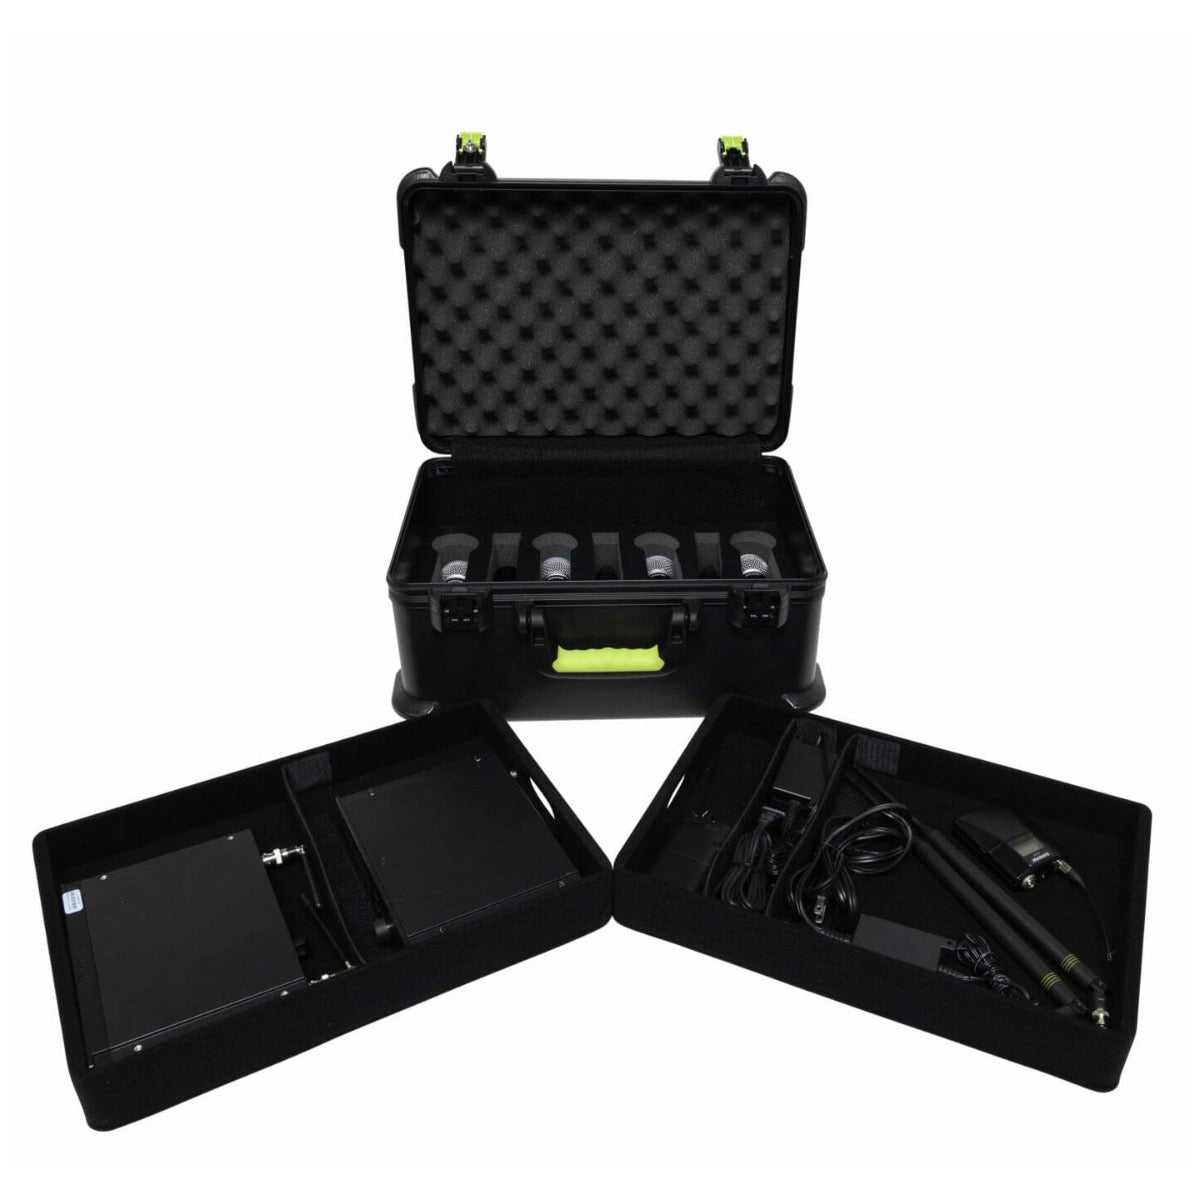 Shure SH-MICCASEW07 Plastic Case With TSA Latches For 7 Wireless Mics and Accessories, View 4